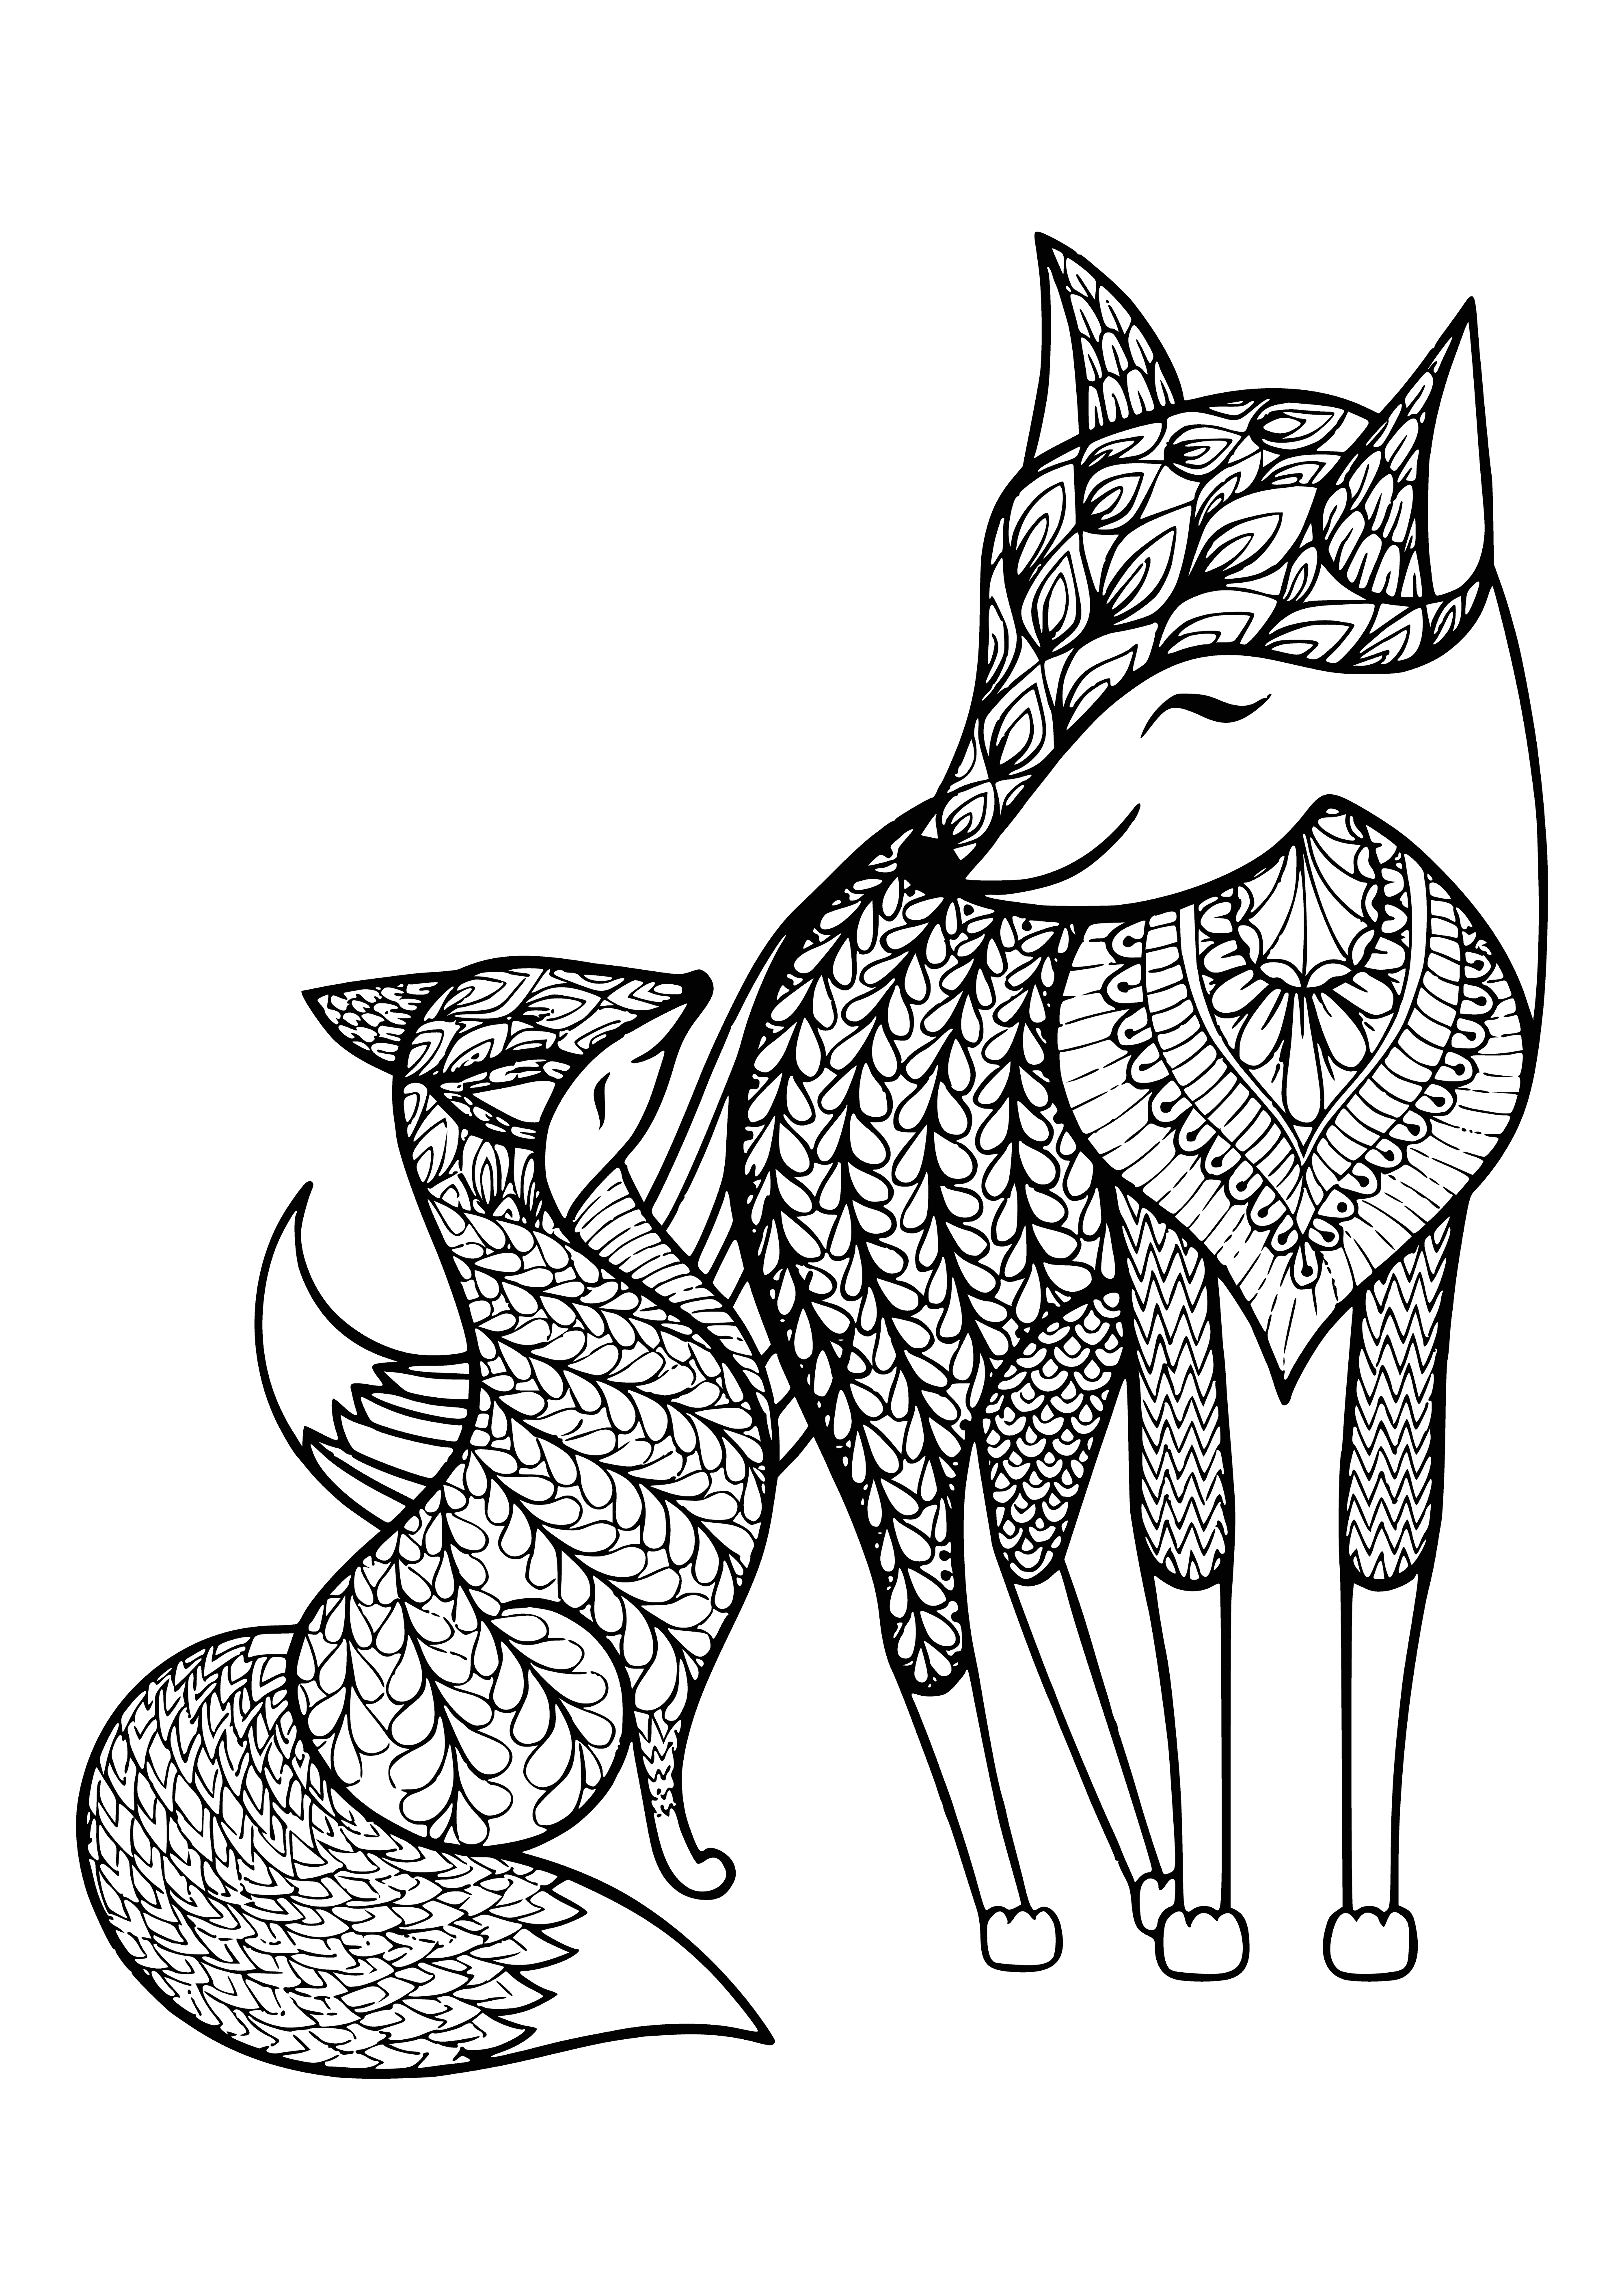 coloring page: Family of foxes is coloring paged; adult foxes rusty red, cubs pale yellow; standing on hind legs, tails curled; bushy tails, pointy ears.